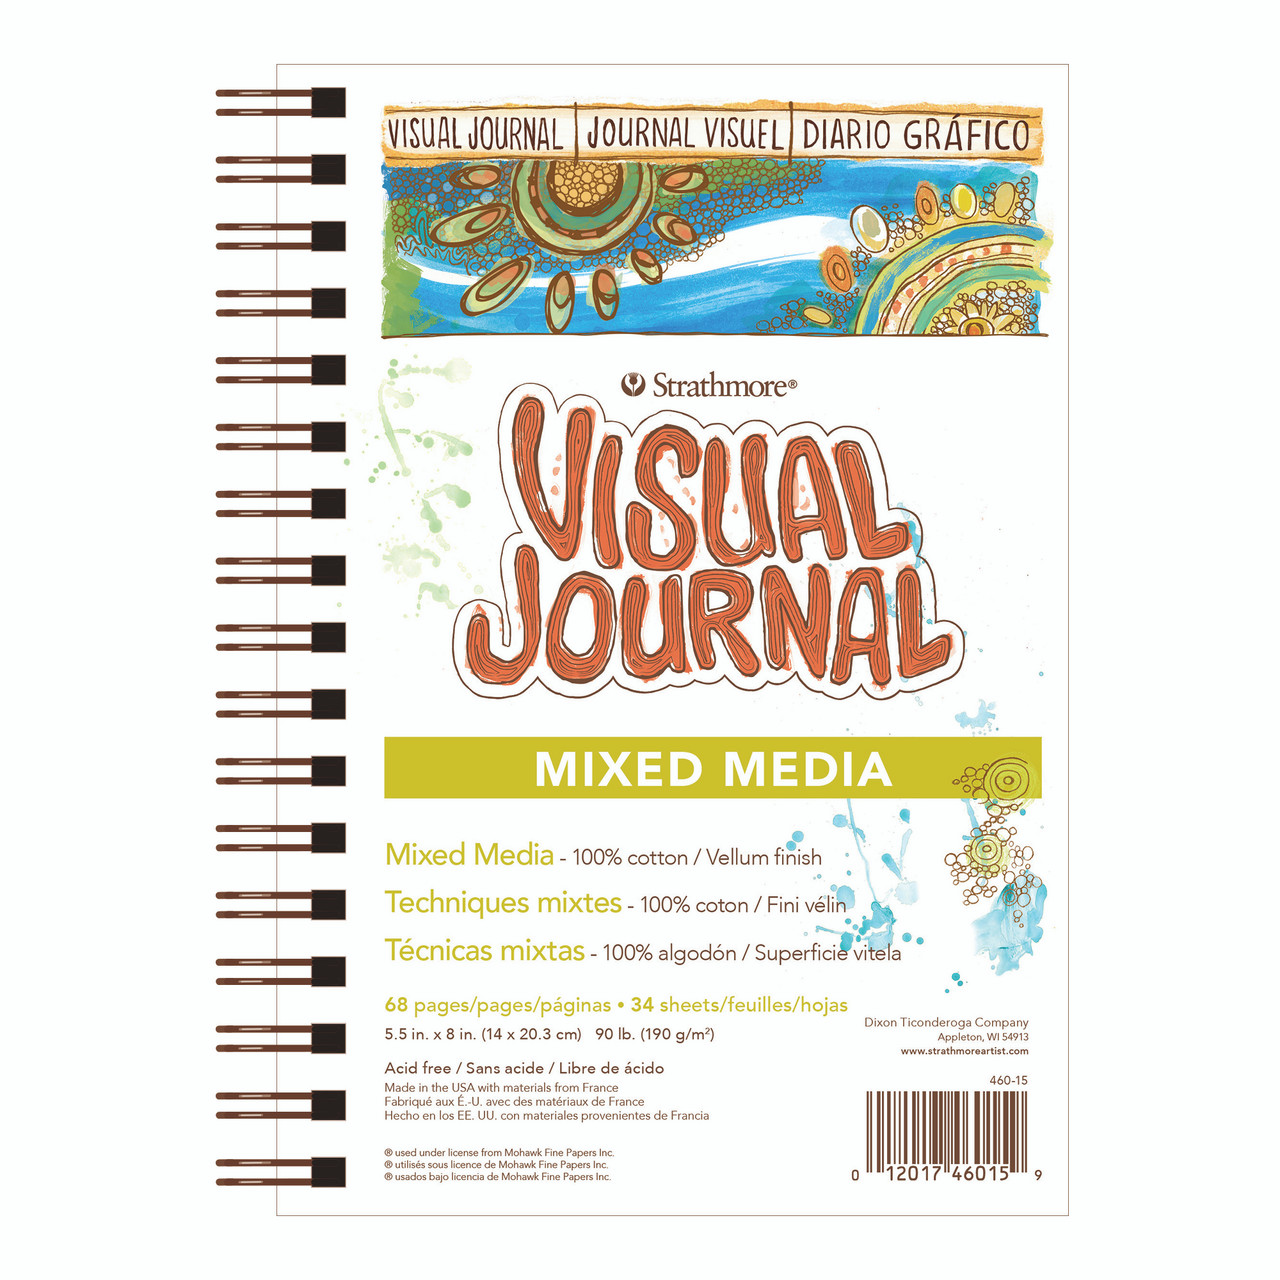 Strathmore 500 Visual Journal Mixed Media Vellum 34 sheets 190gsm 5.5x8"